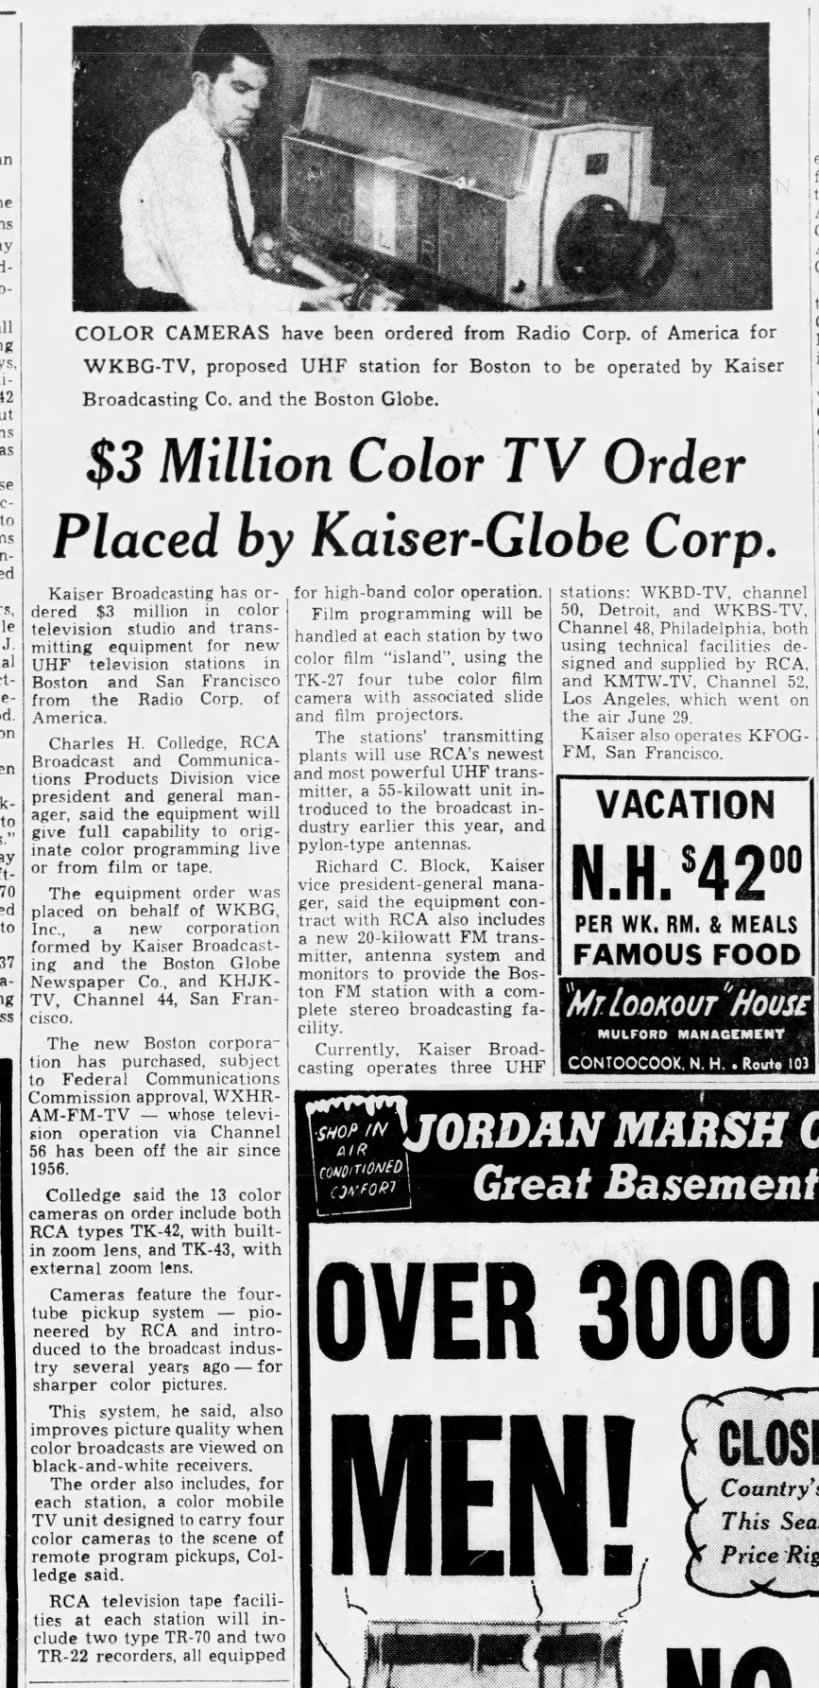 $3 Million Color TV Order Placed by Kaiser-Globe Corp.